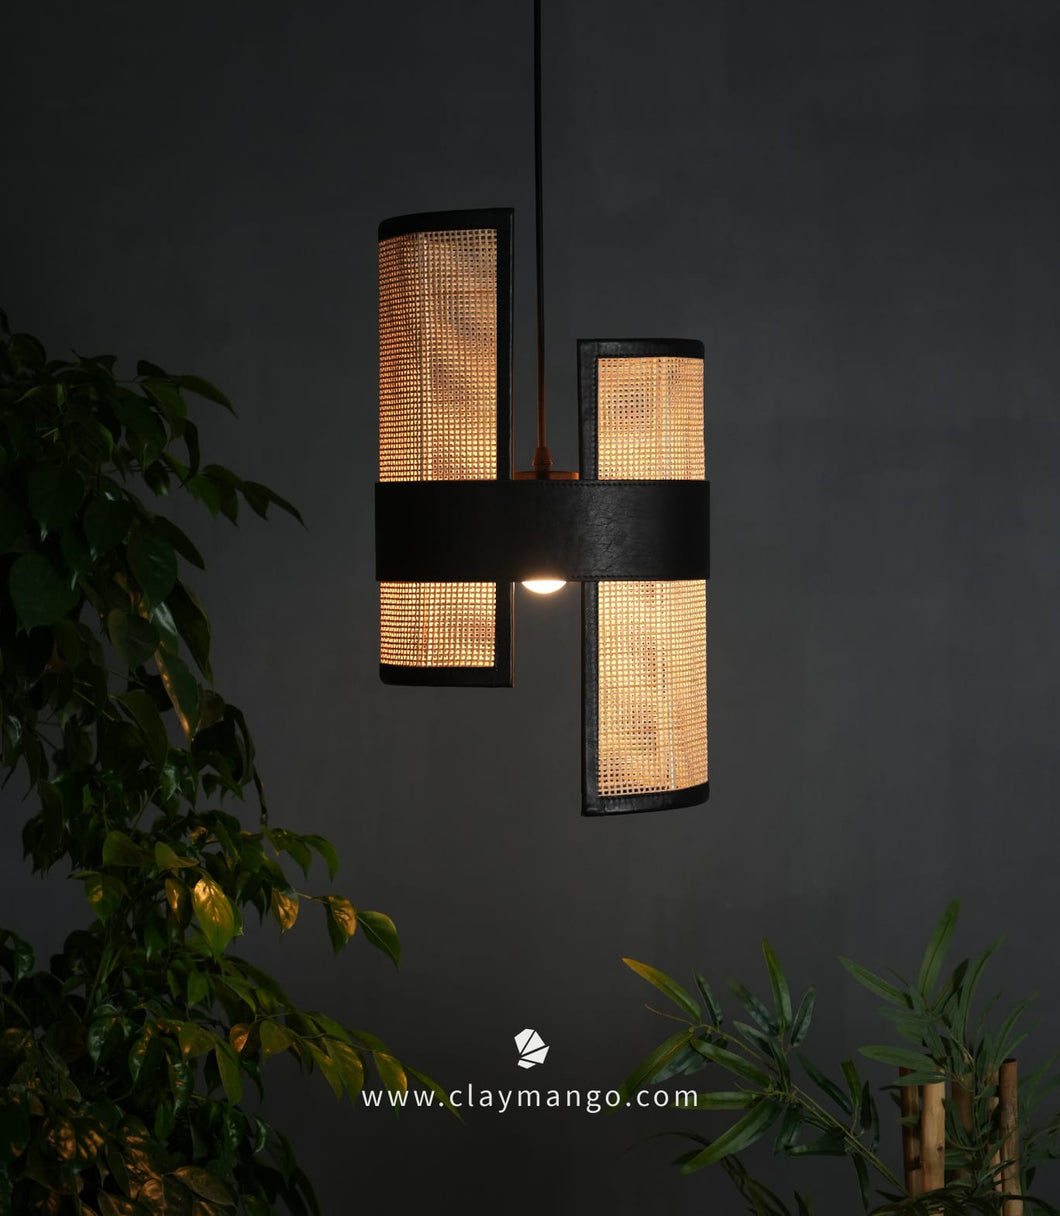 Madhyama - Unique handmade Woven Hanging Pendant Light, Natural/Cane Pendant Light for Home restaurants and offices.